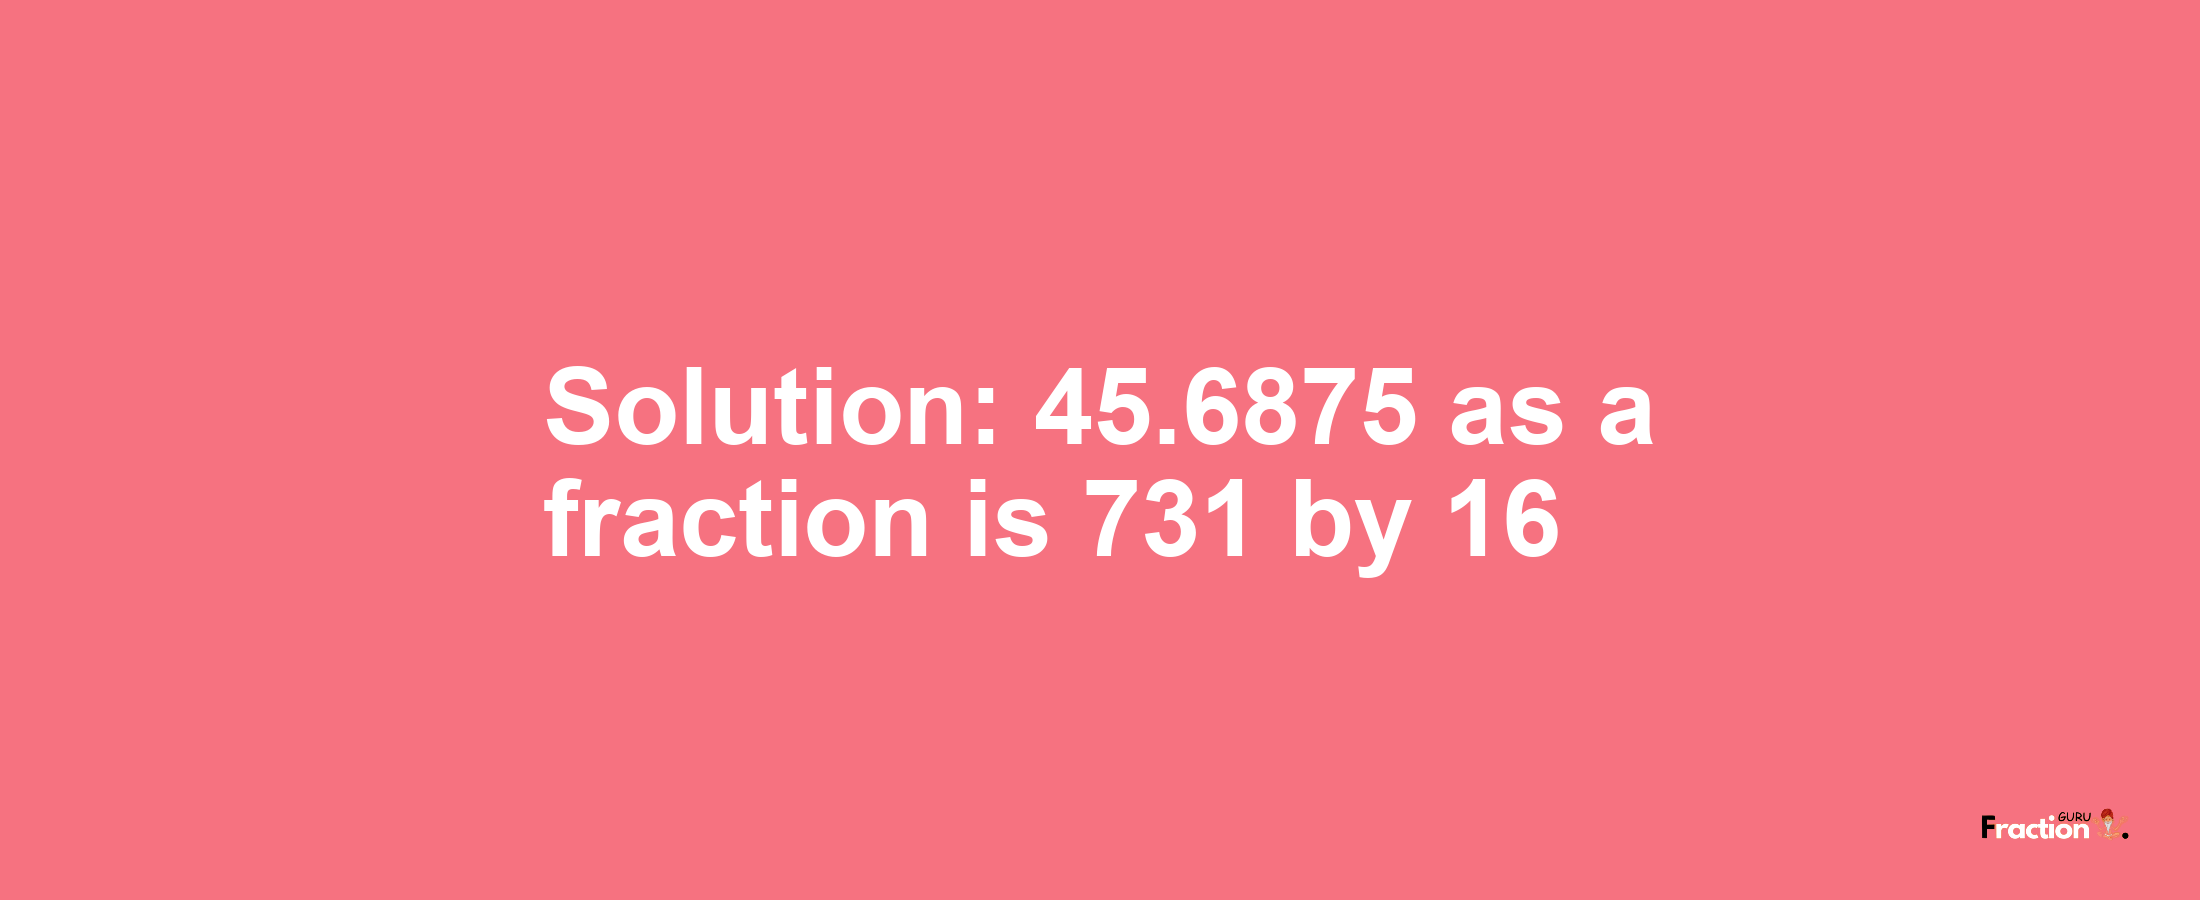 Solution:45.6875 as a fraction is 731/16